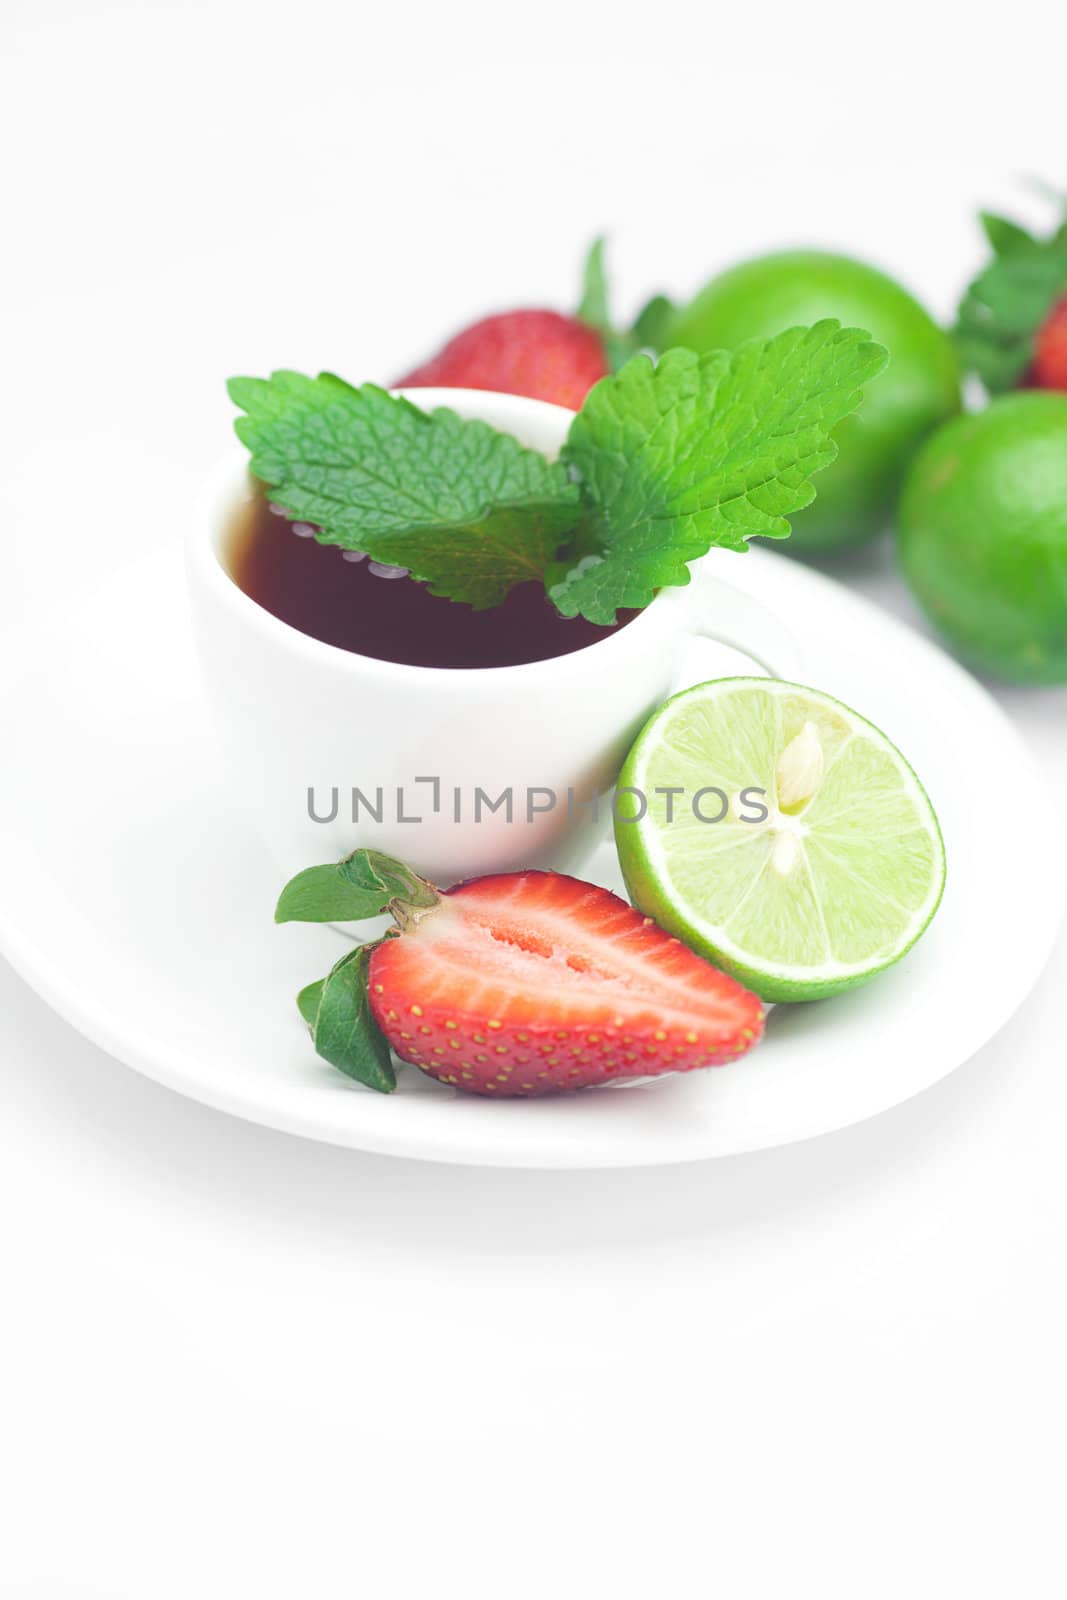 cup of tea,strawberry,mint and lime isolated on white